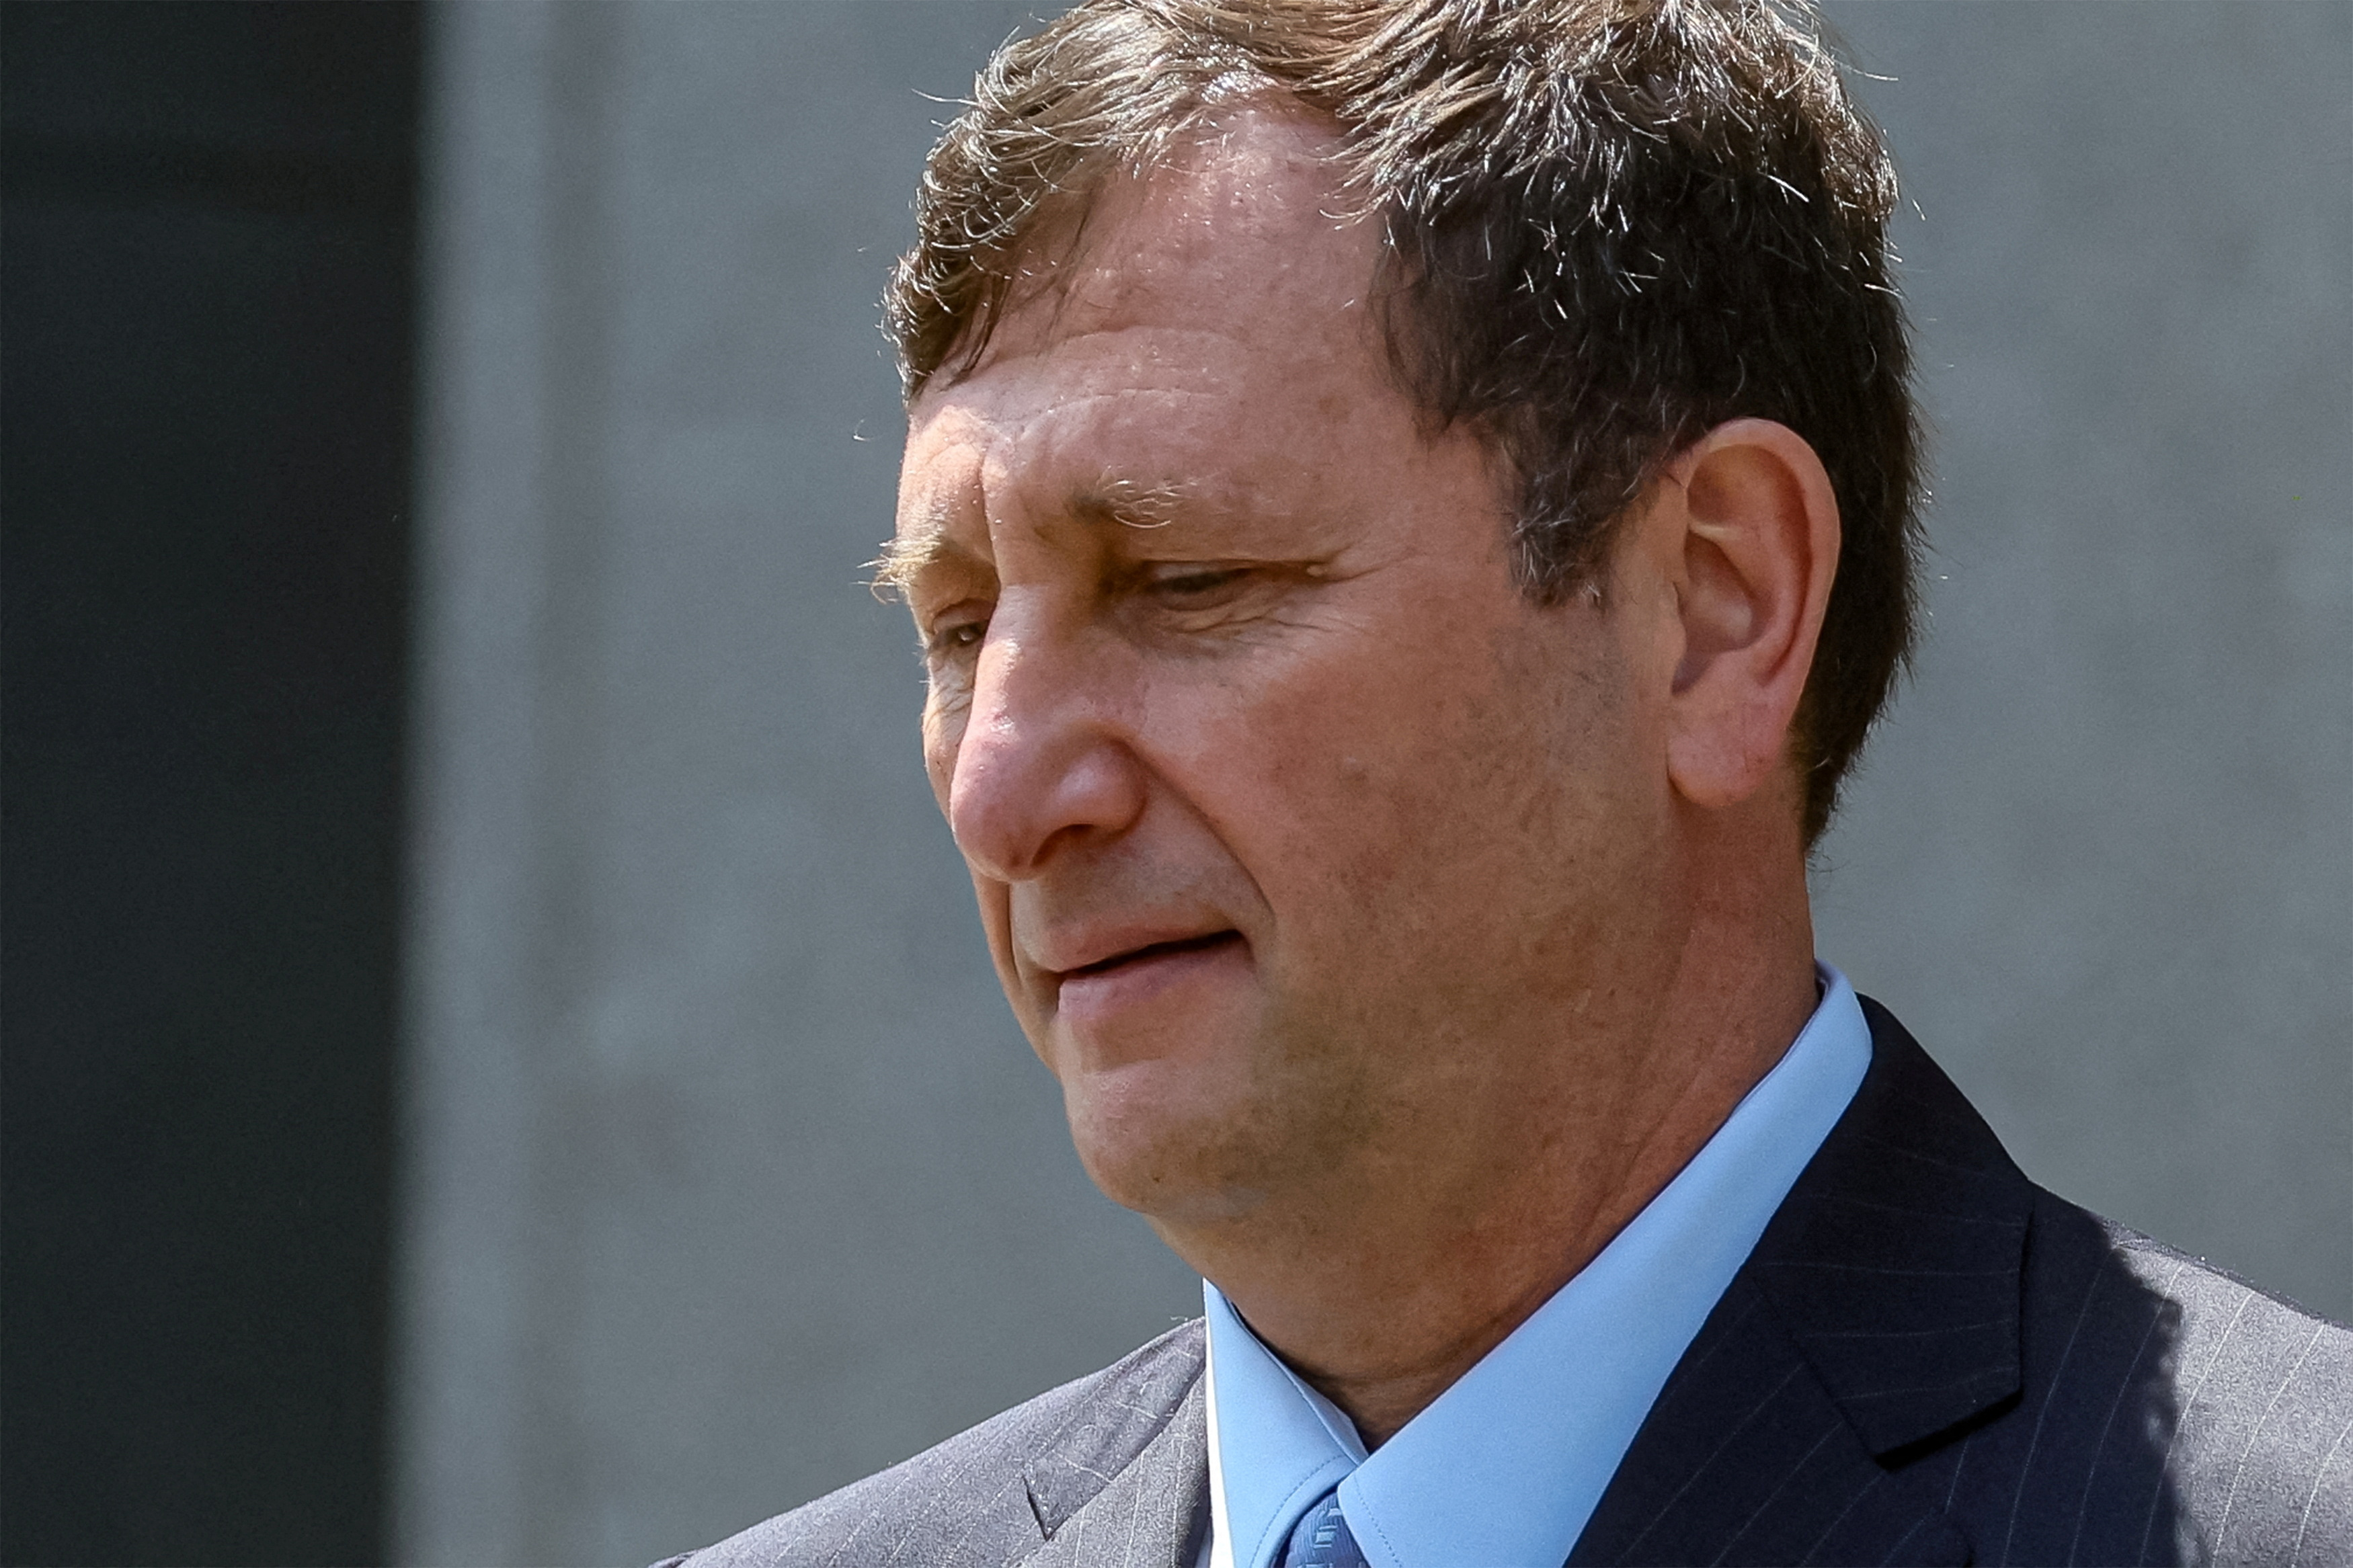 Alex Mashinsky, founder and former CEO of bankrupt cryptocurrency lender Celsius Network, exits the Manhattan federal court in New York